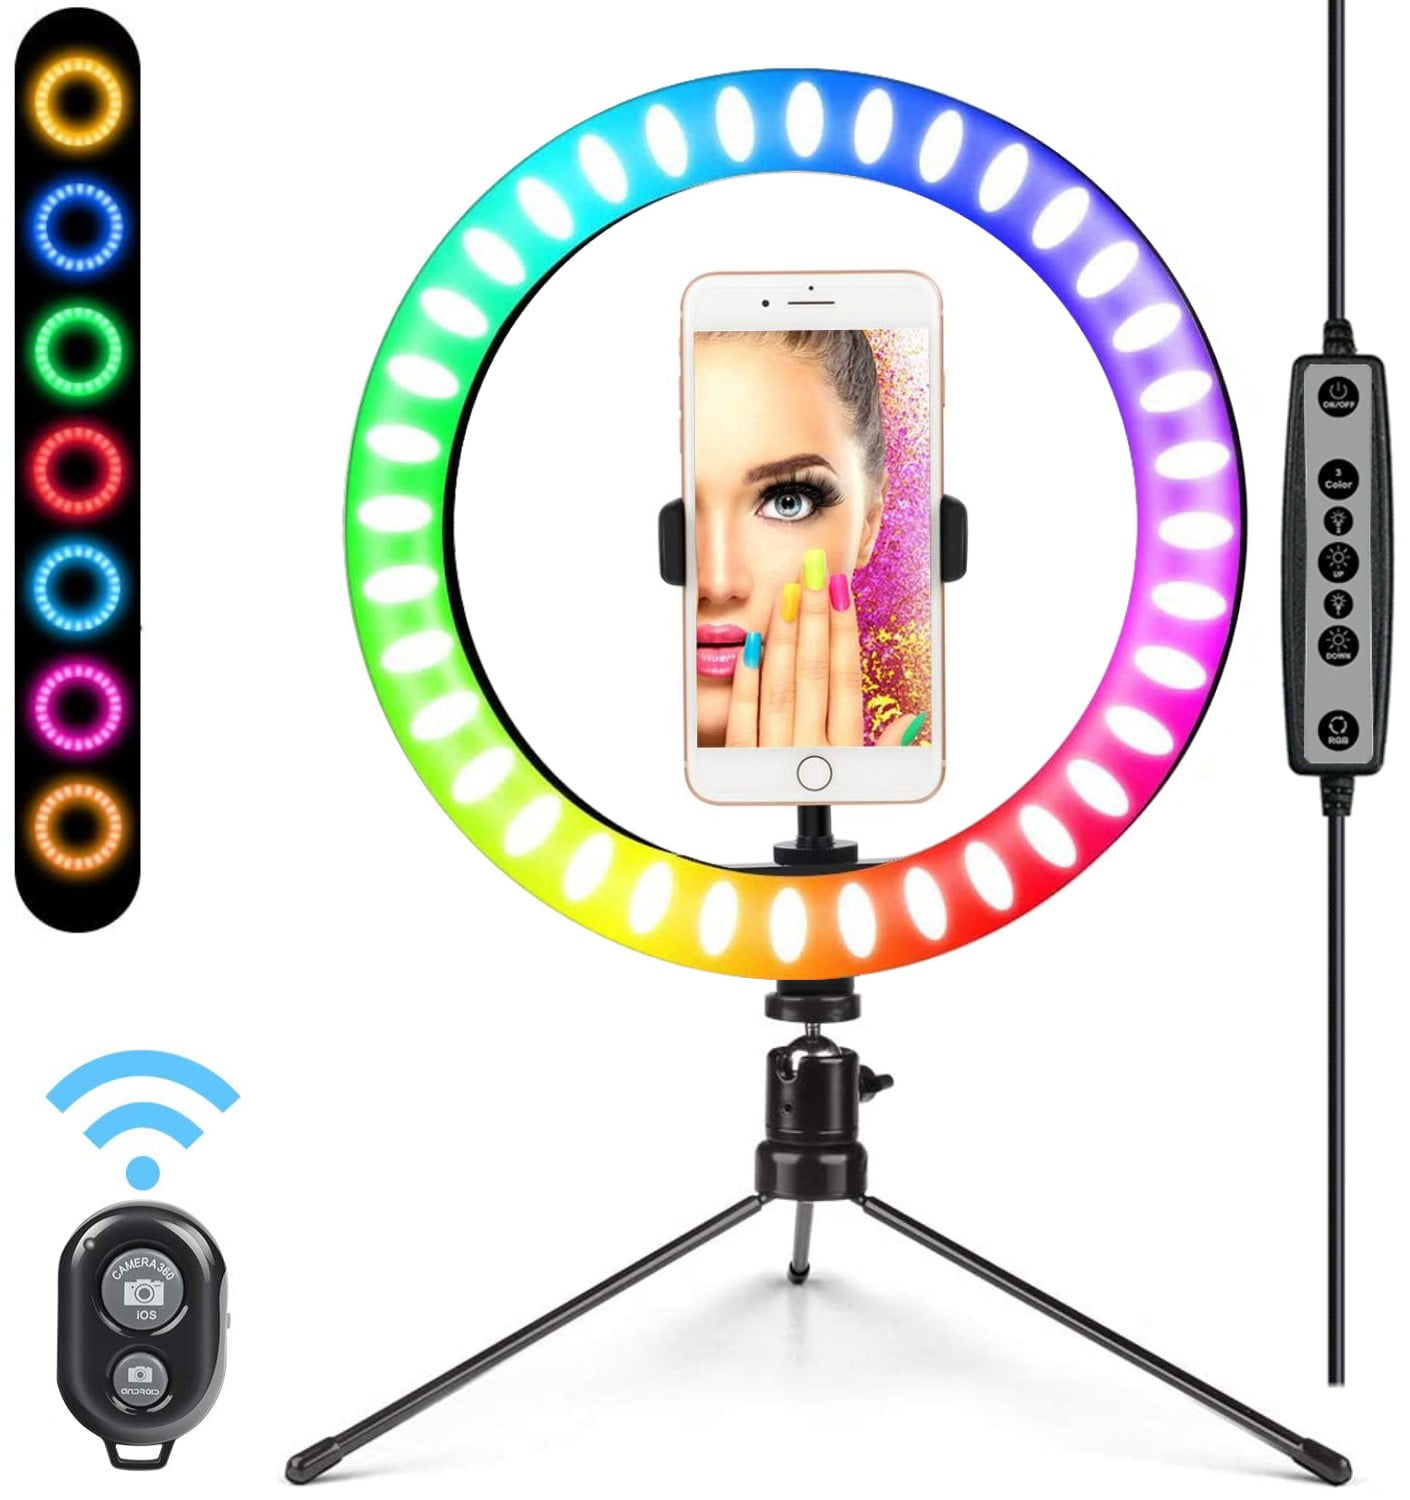 CODN 12” Ring Light with Stand and Phone Holder Selfie Circle Light with Wireless Remote Shutter for YouTube/TikTok/Makeup/Live Stream/Photography Dimmable LED Ring Light for Phone 